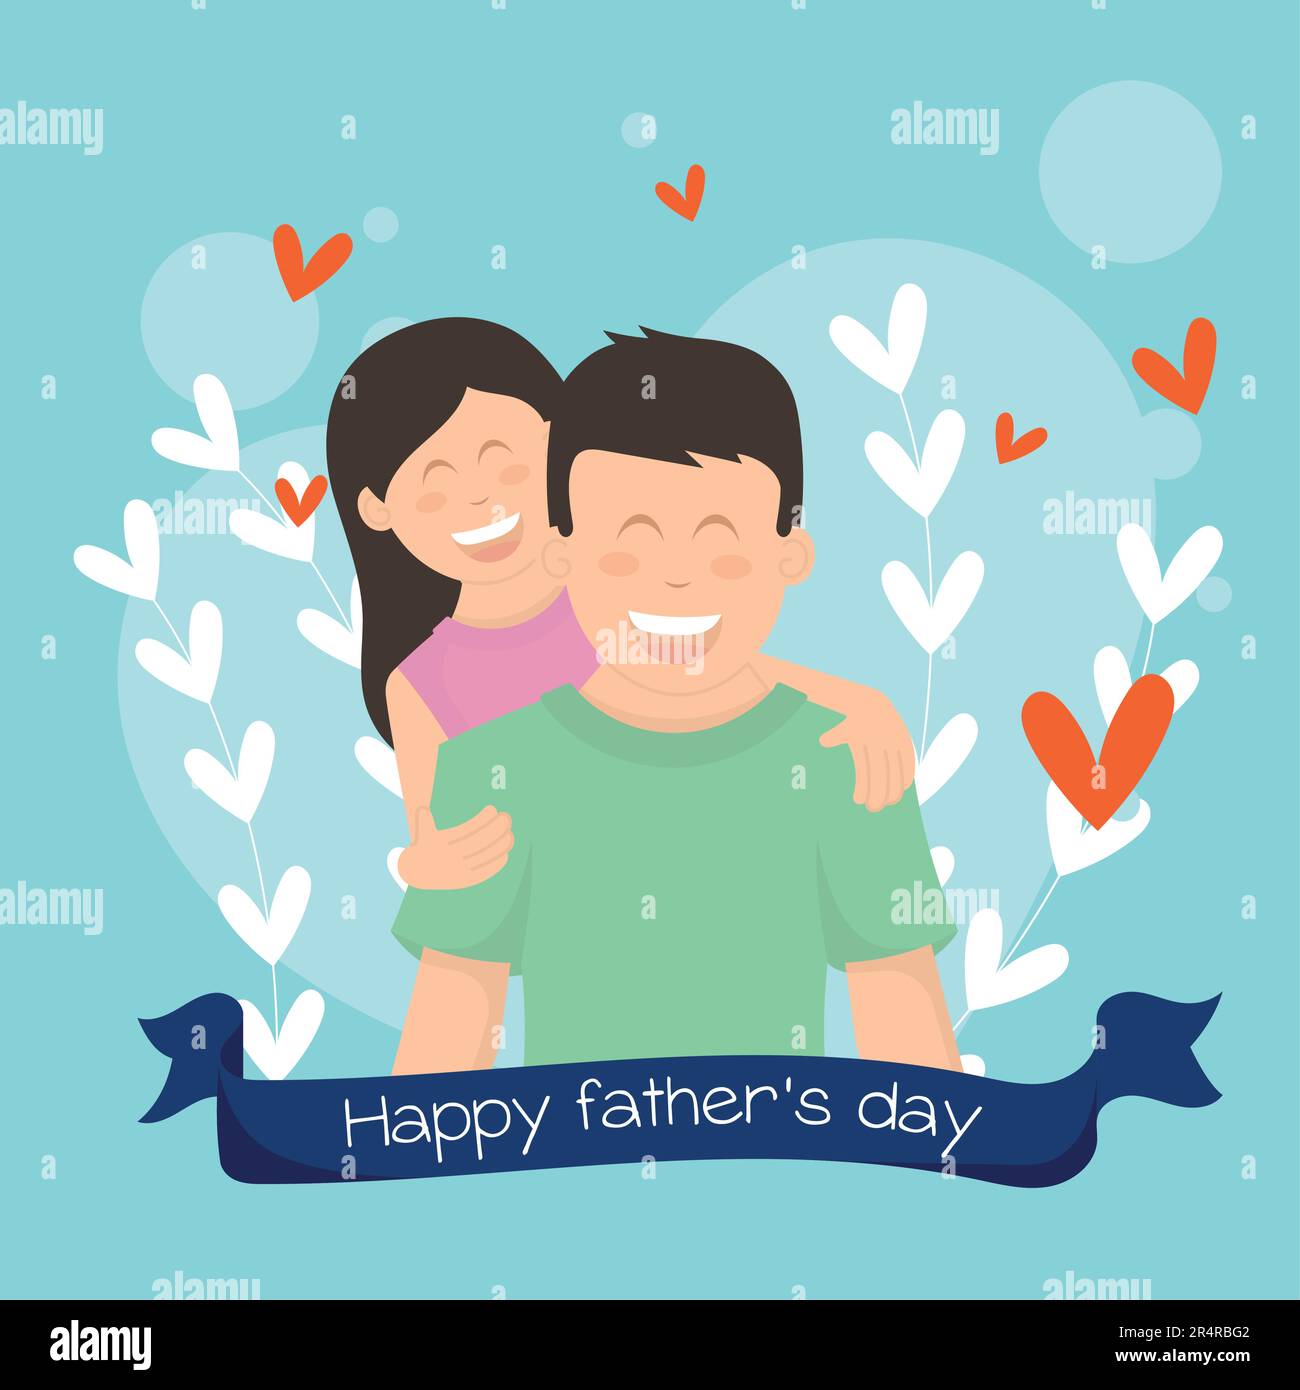 Father's Day: Apostrophe, Capitalization, and Spelling Fun - Drawings Of...